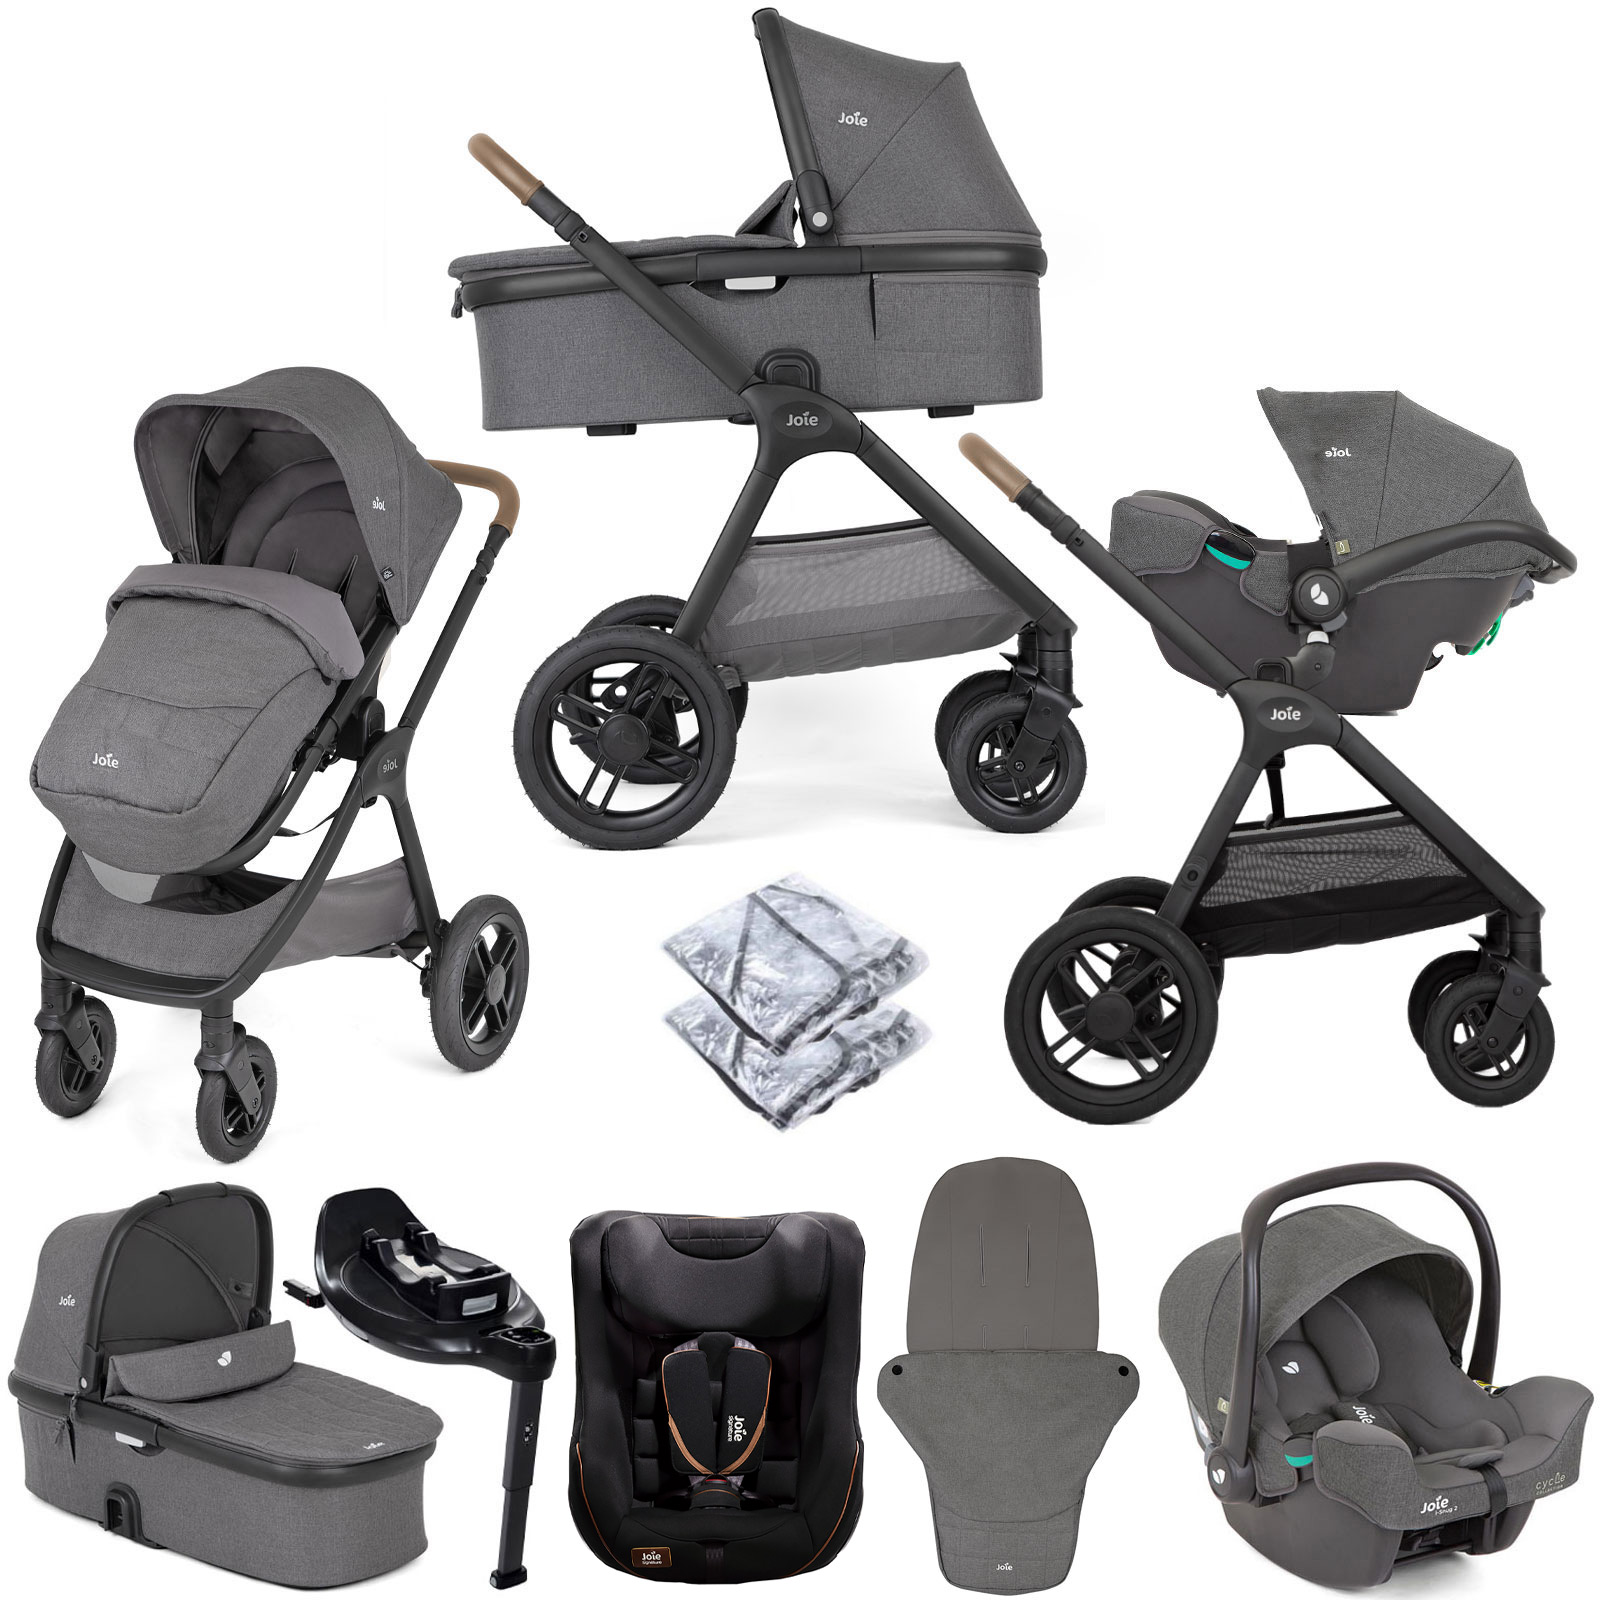 Joie Honour Pushchair Travel System with Carrycot, i-Harbour Car Seat & i-Base Encore ISOFIX Base - Thunder